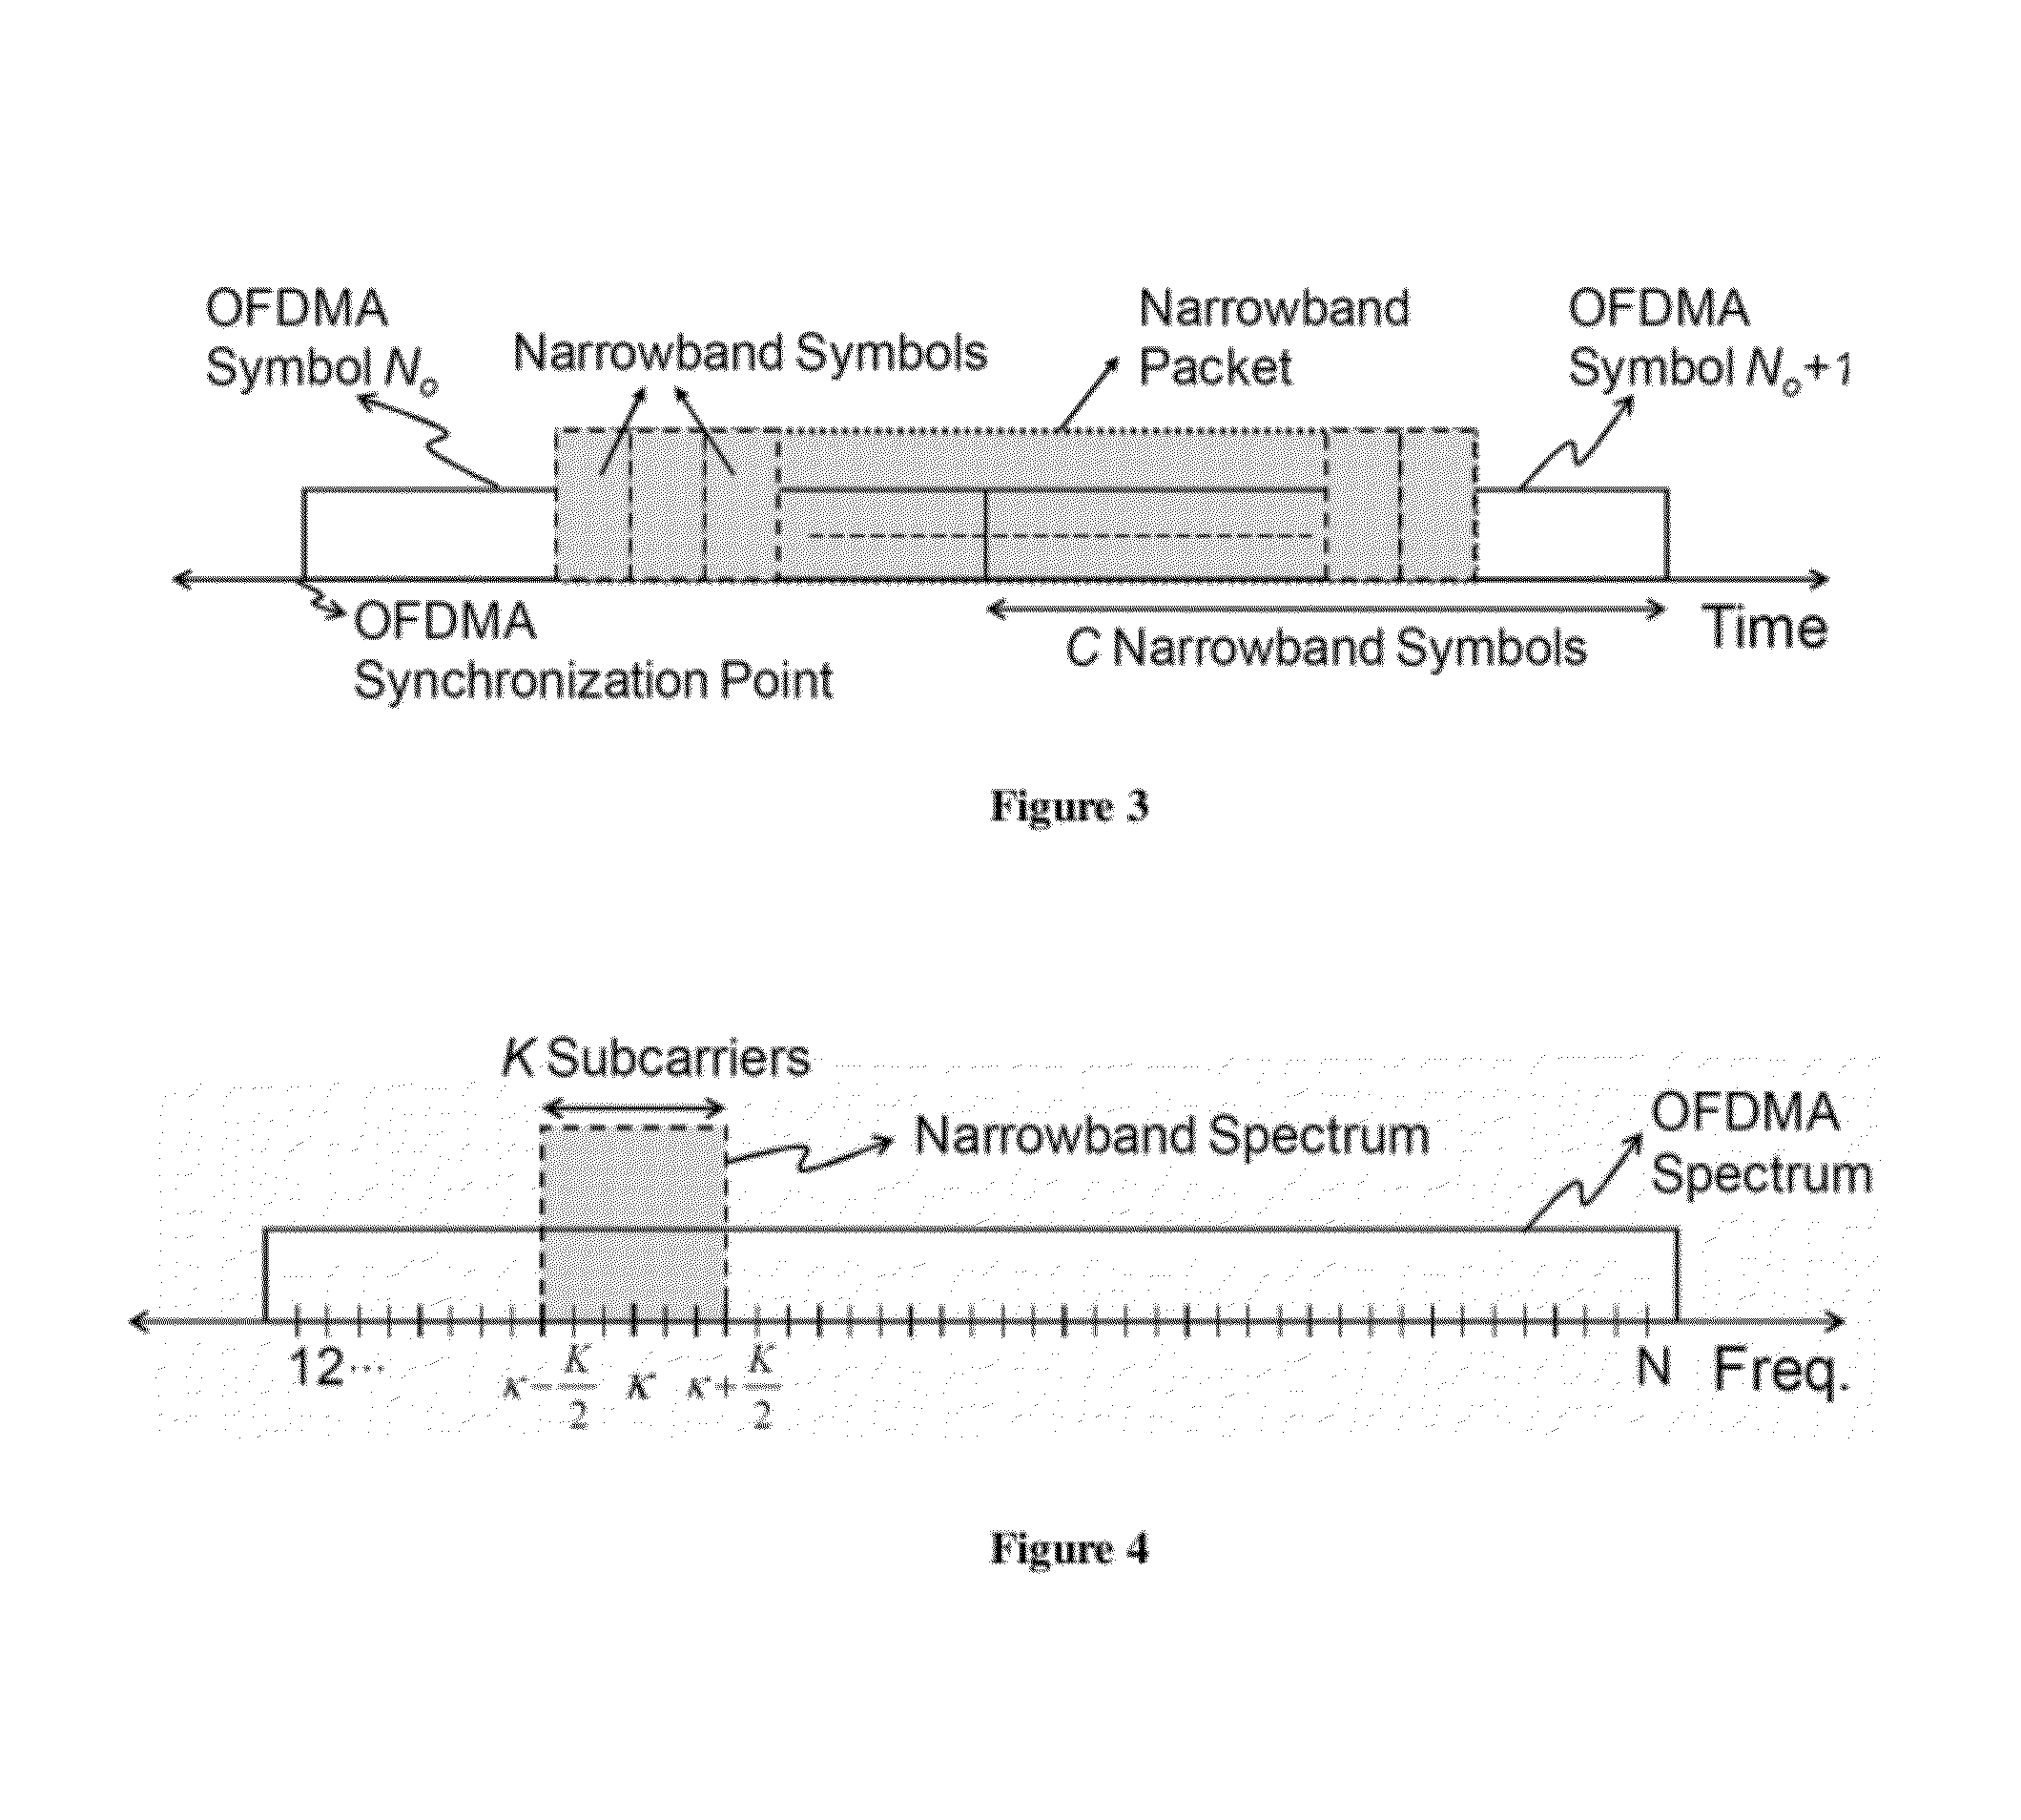 Method for iterative interference cancellation for co-channel multi-carrier and narrowband systems